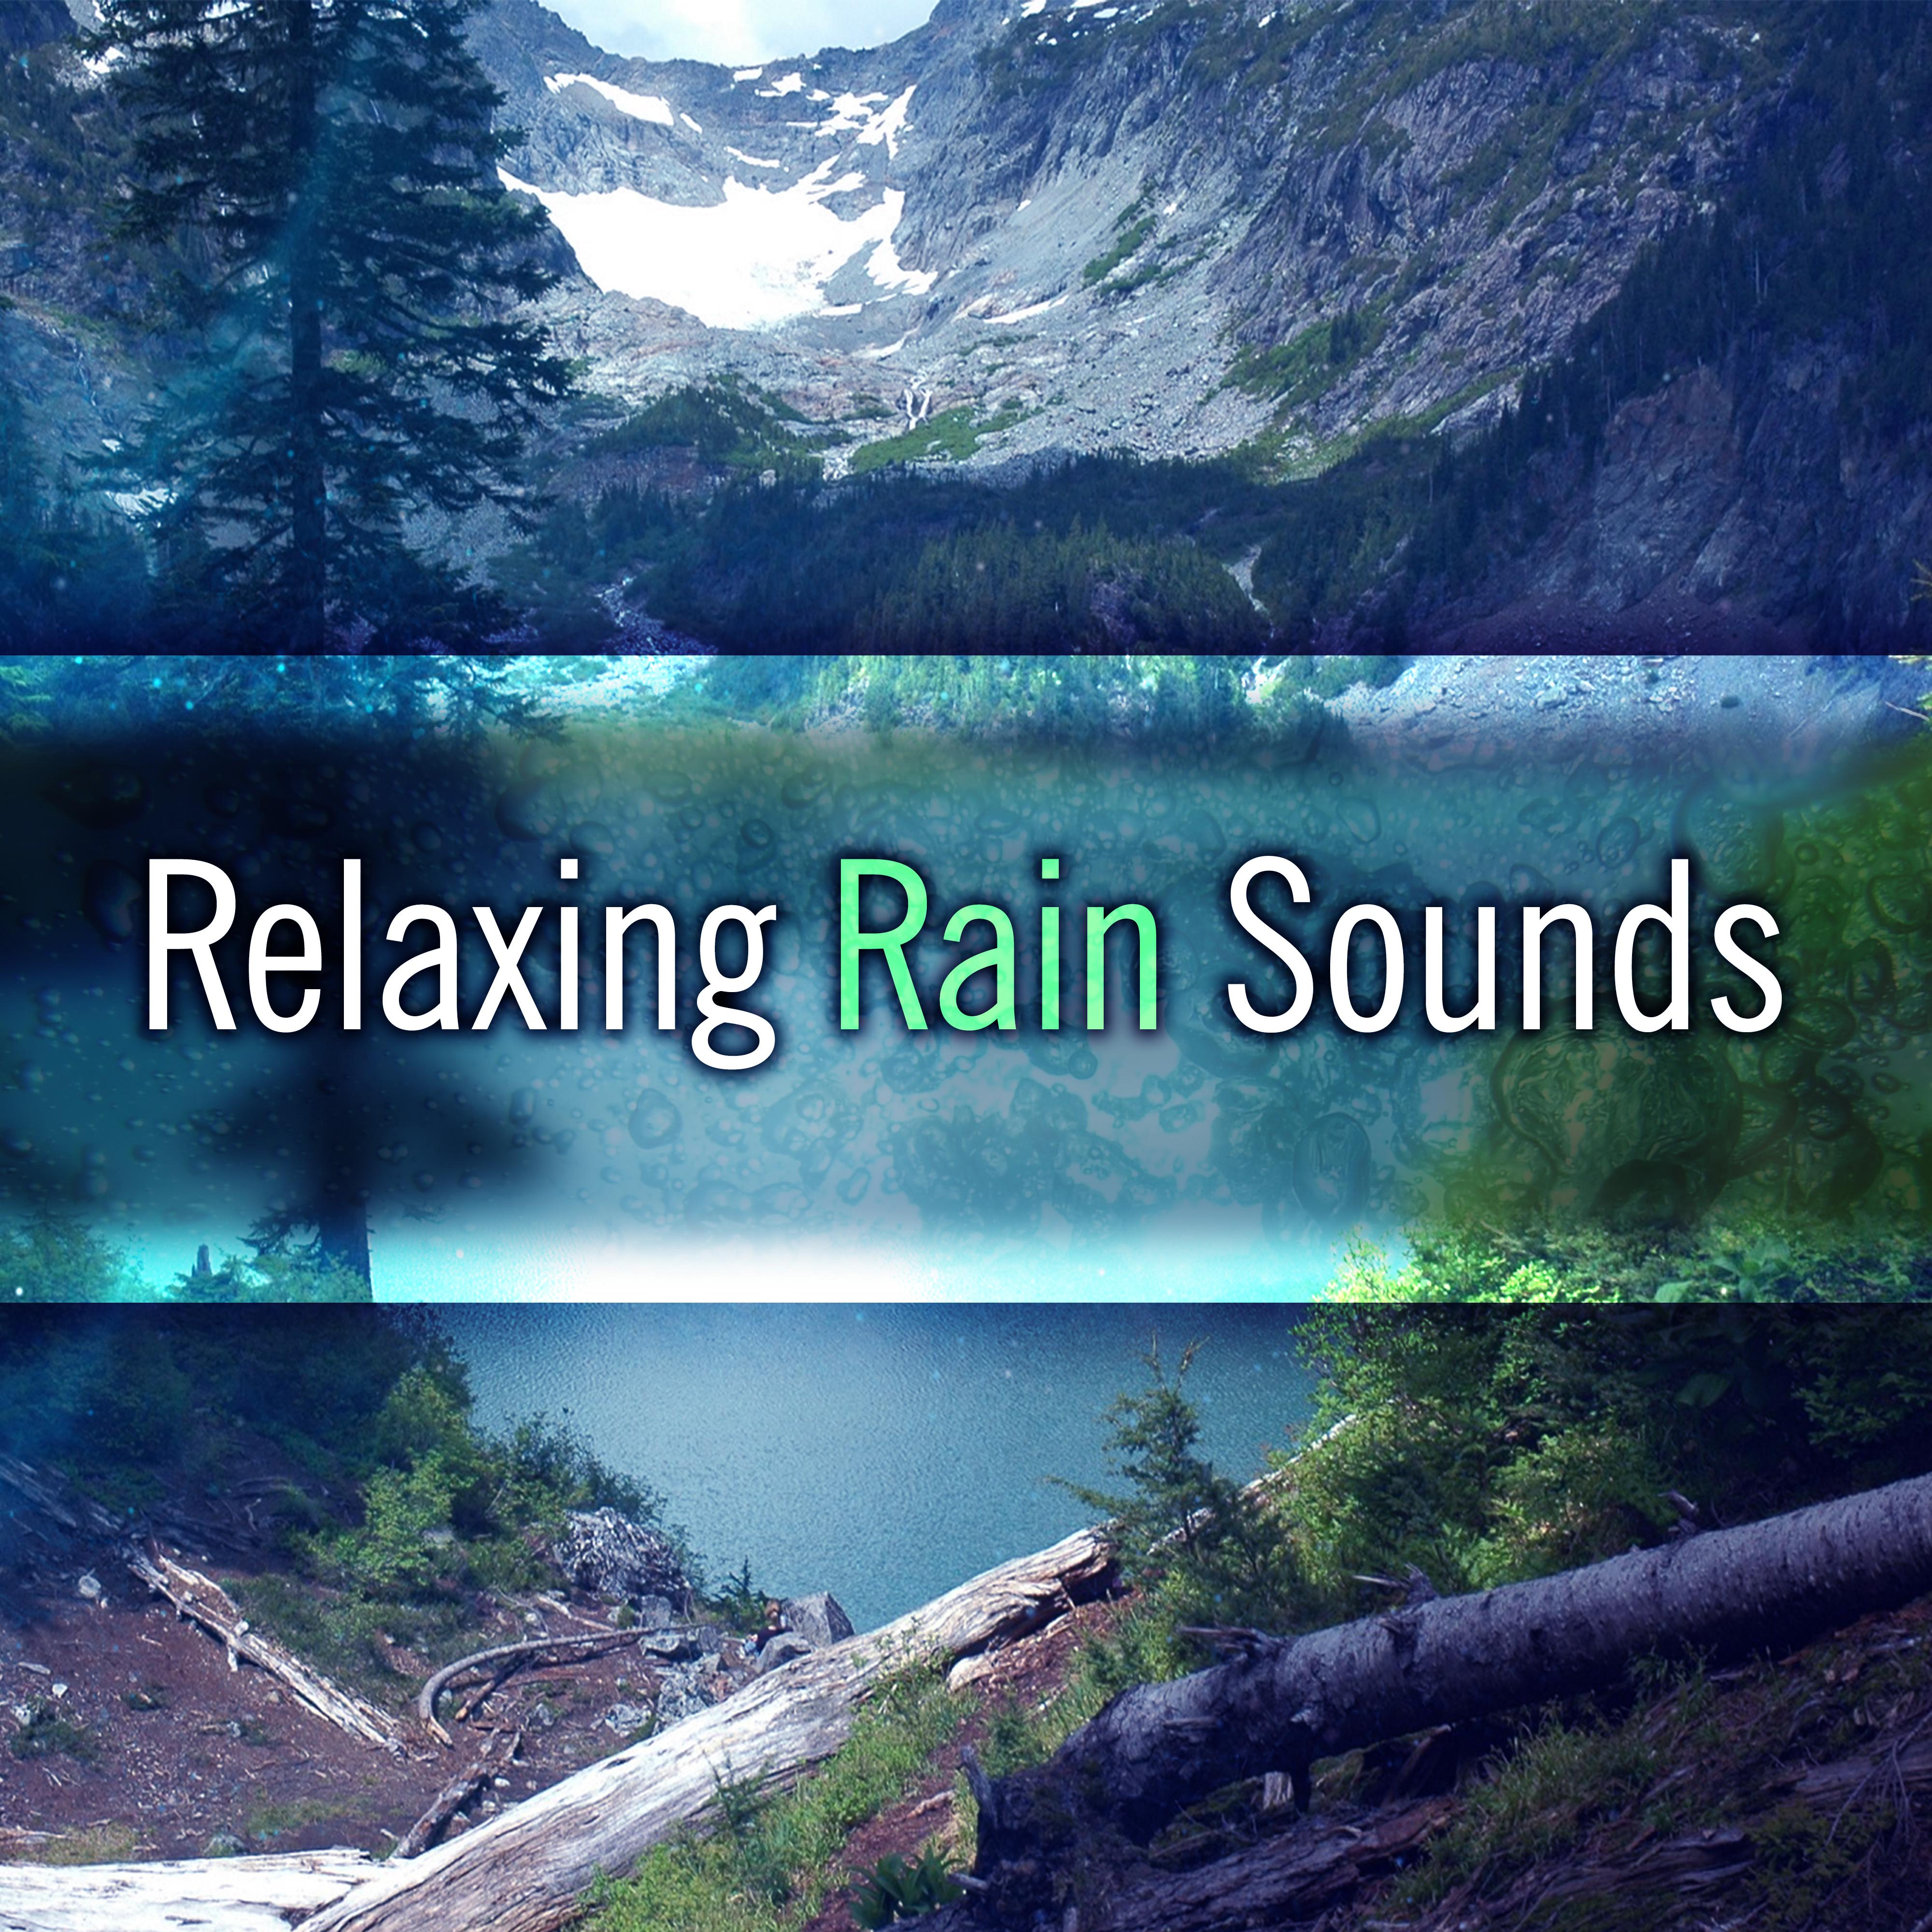 Relaxing Rain Sounds – Relaxing Music, Soft Sounds of New Age Music, Nature Music Therapy, Spa Songs